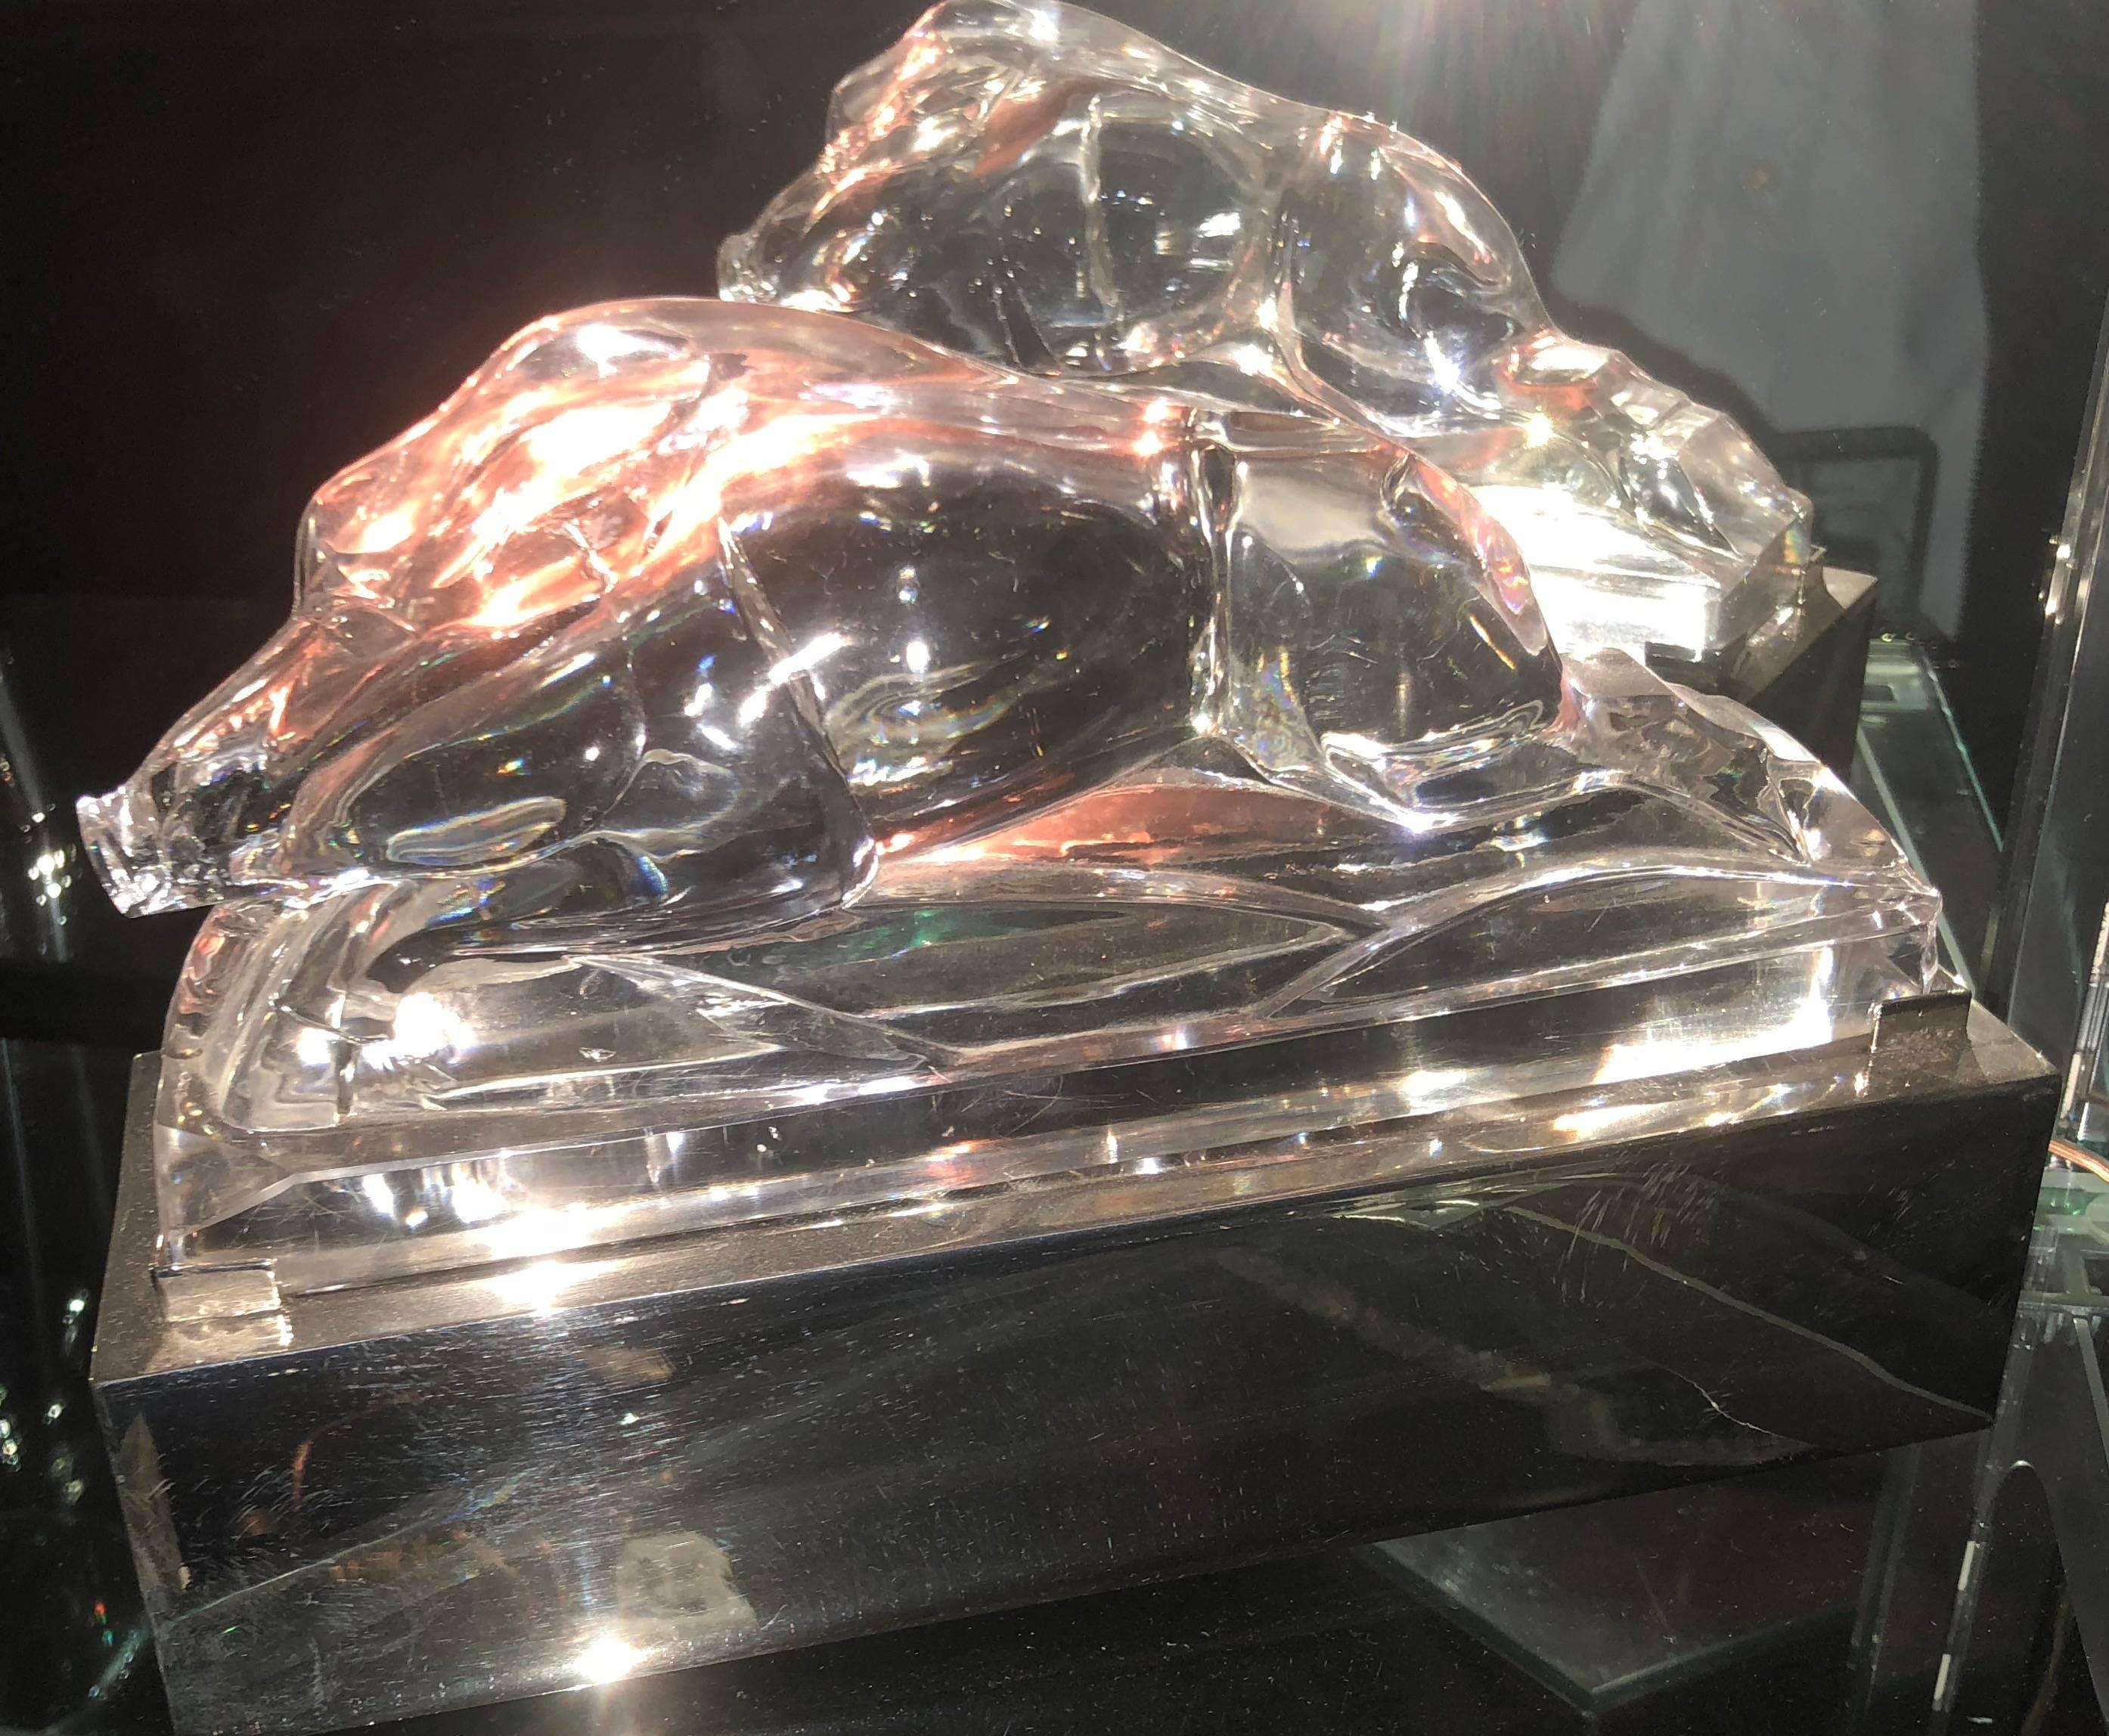 Baccarat style glass sculpture depicting a boar, hog or swine in the Art Deco style. Subtle yet fine details of lines depicting one animal mounted on a restored chrome fitted base. Animal sculptures are important decorative directions seen over and